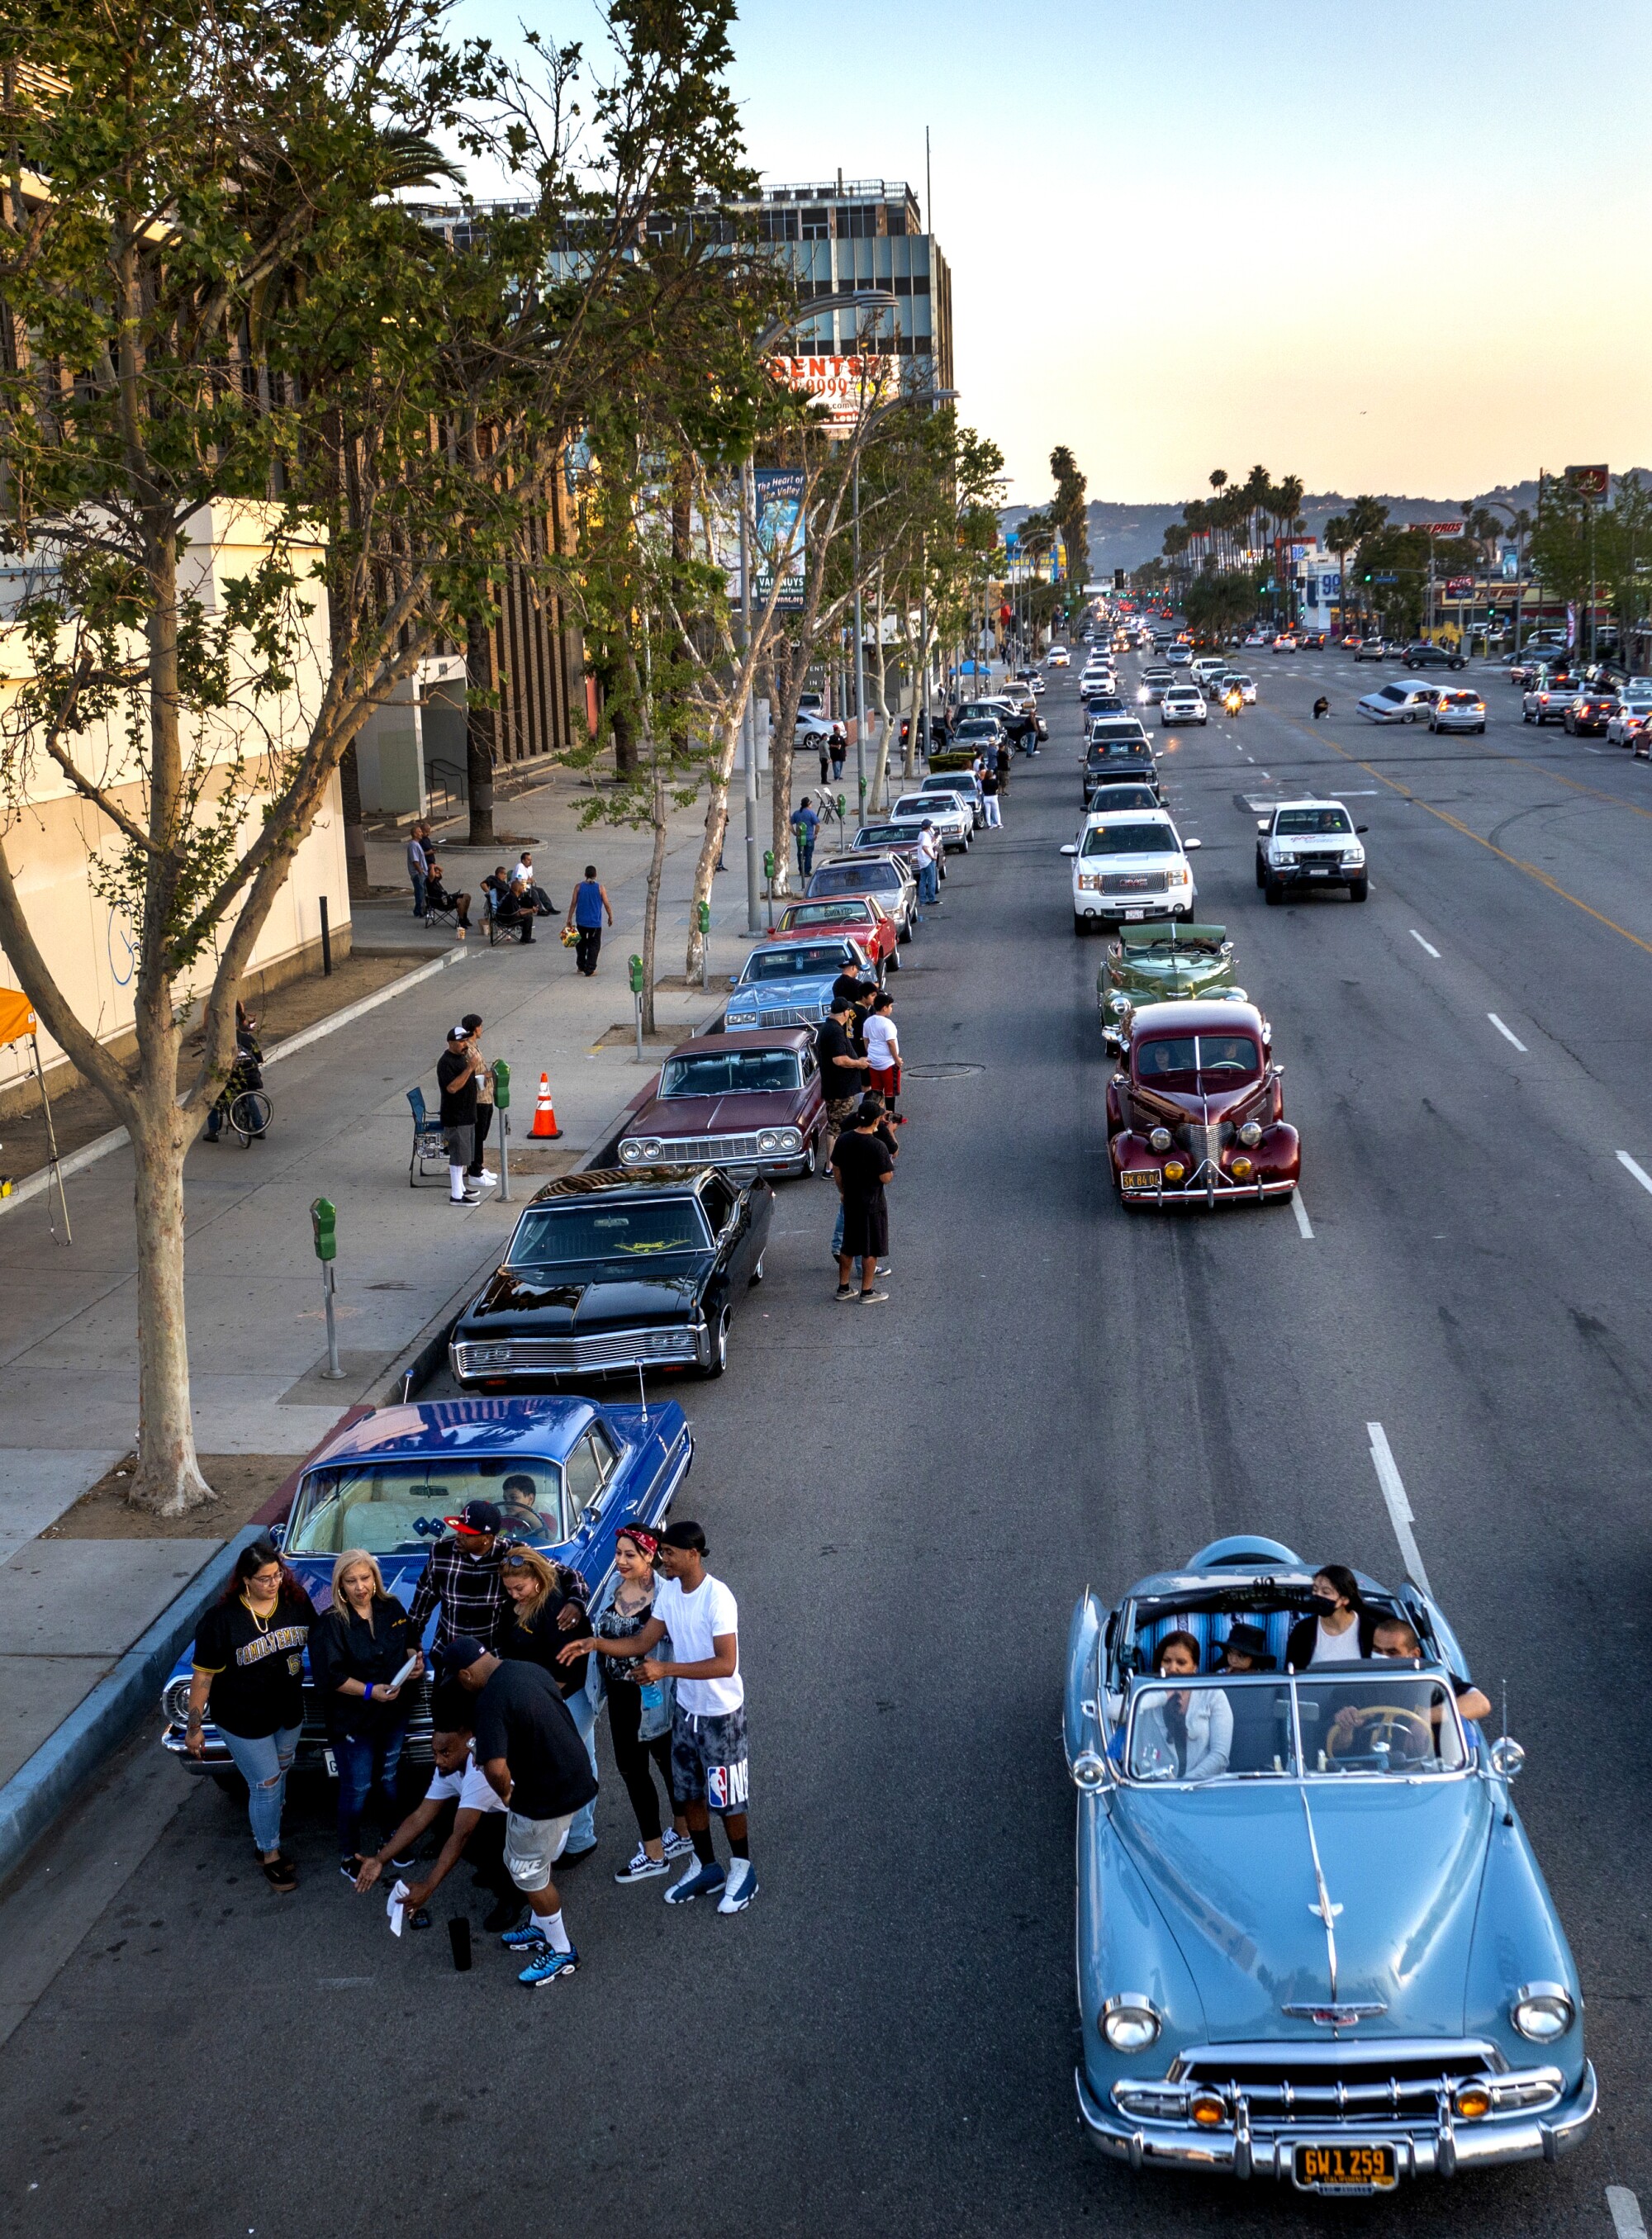 People gather along Van Nuys Boulevard to watch vintage cars cruise by